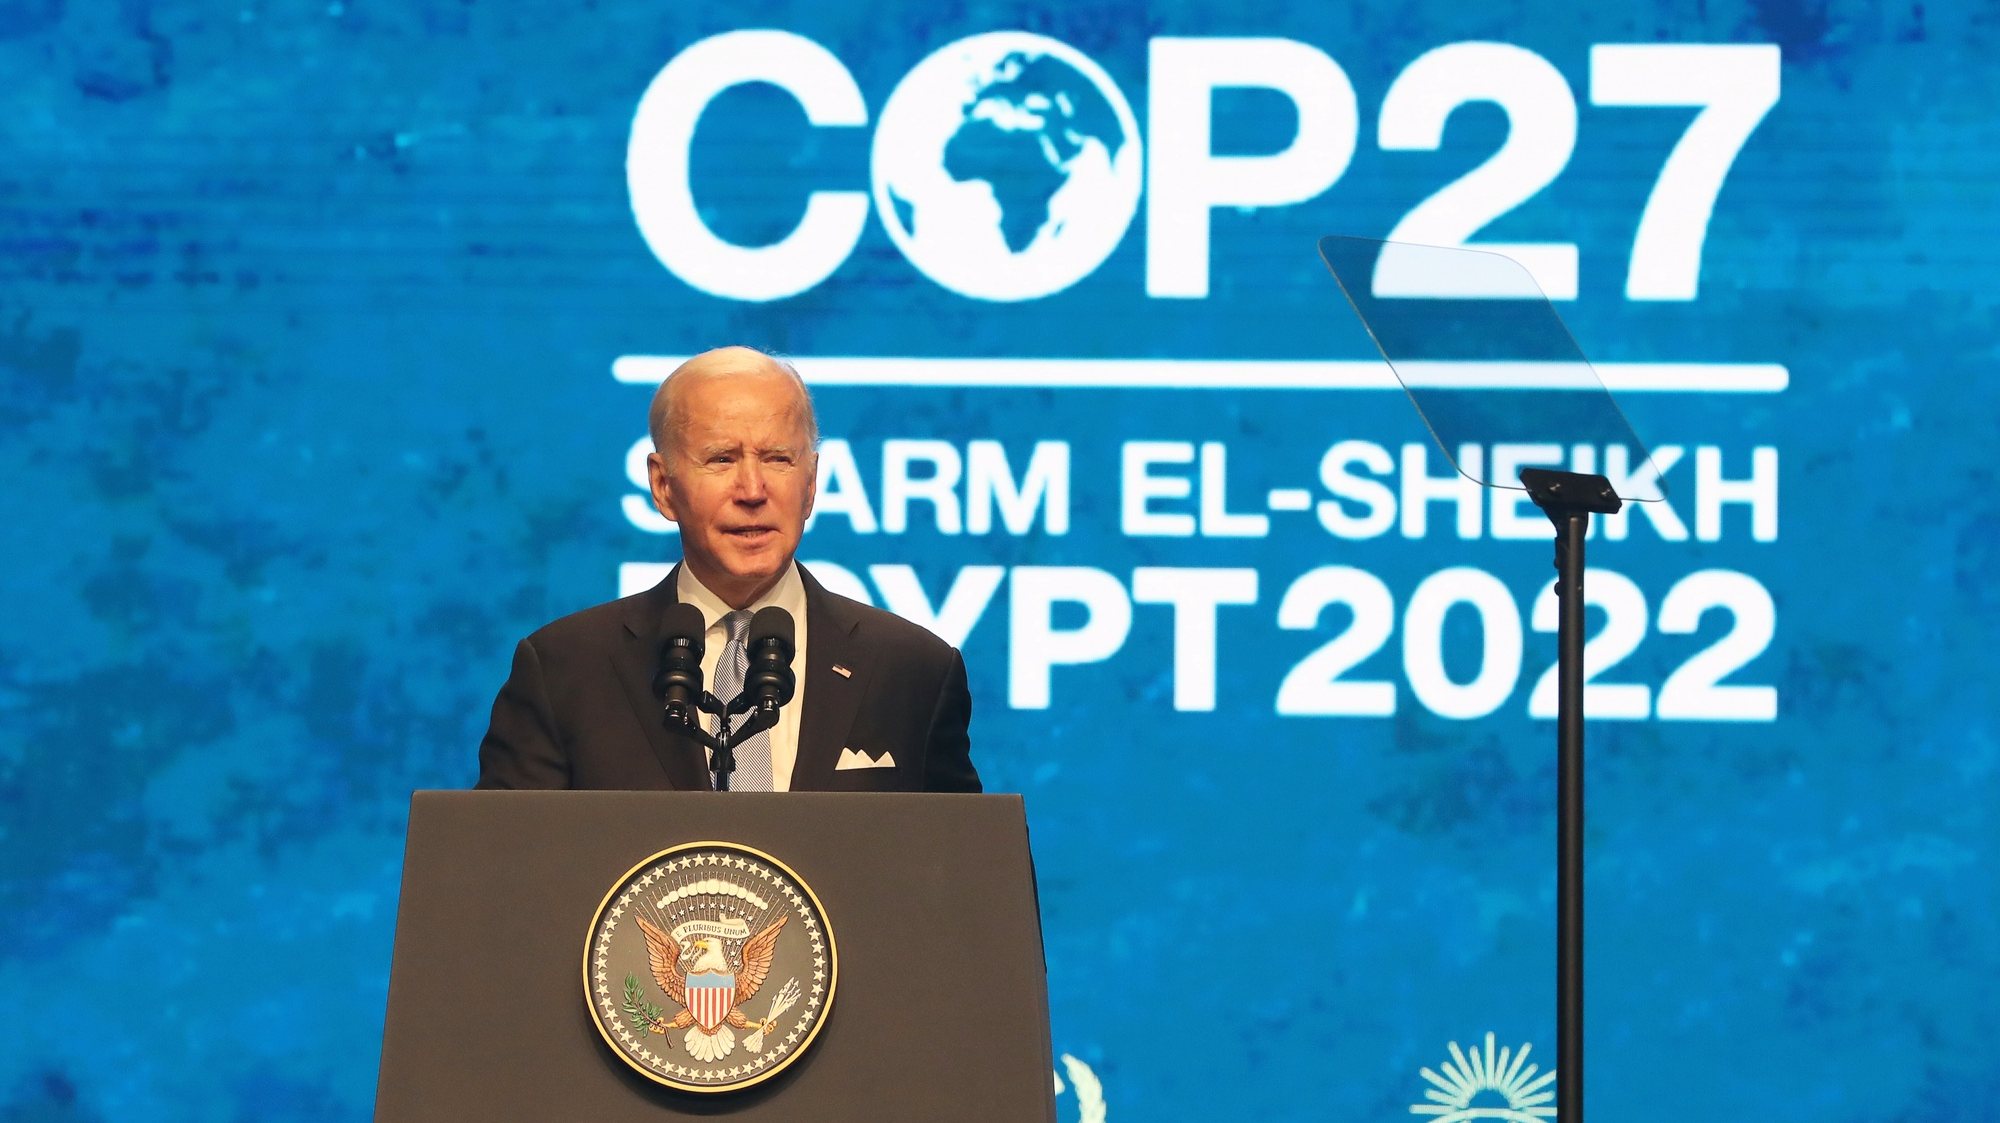 epa10300105 US President Joe Biden delivers his speech at the 2022 United Nations Climate Change Conference (COP27), in Sharm El-Sheikh, Egypt, 11 November 2022. The 2022 United Nations Climate Change Conference (COP27), runs from 06-18 November, and is expected to host one of the largest number of participants in the annual global climate conference as over 40,000 estimated attendees, including heads of states and governments, civil society, media and other relevant stakeholders will attend. The events will include a Climate Implementation Summit, thematic days, flagship initiatives, and Green Zone activities engaging with climate and other global challenges.  EPA/KHALED ELFIQI